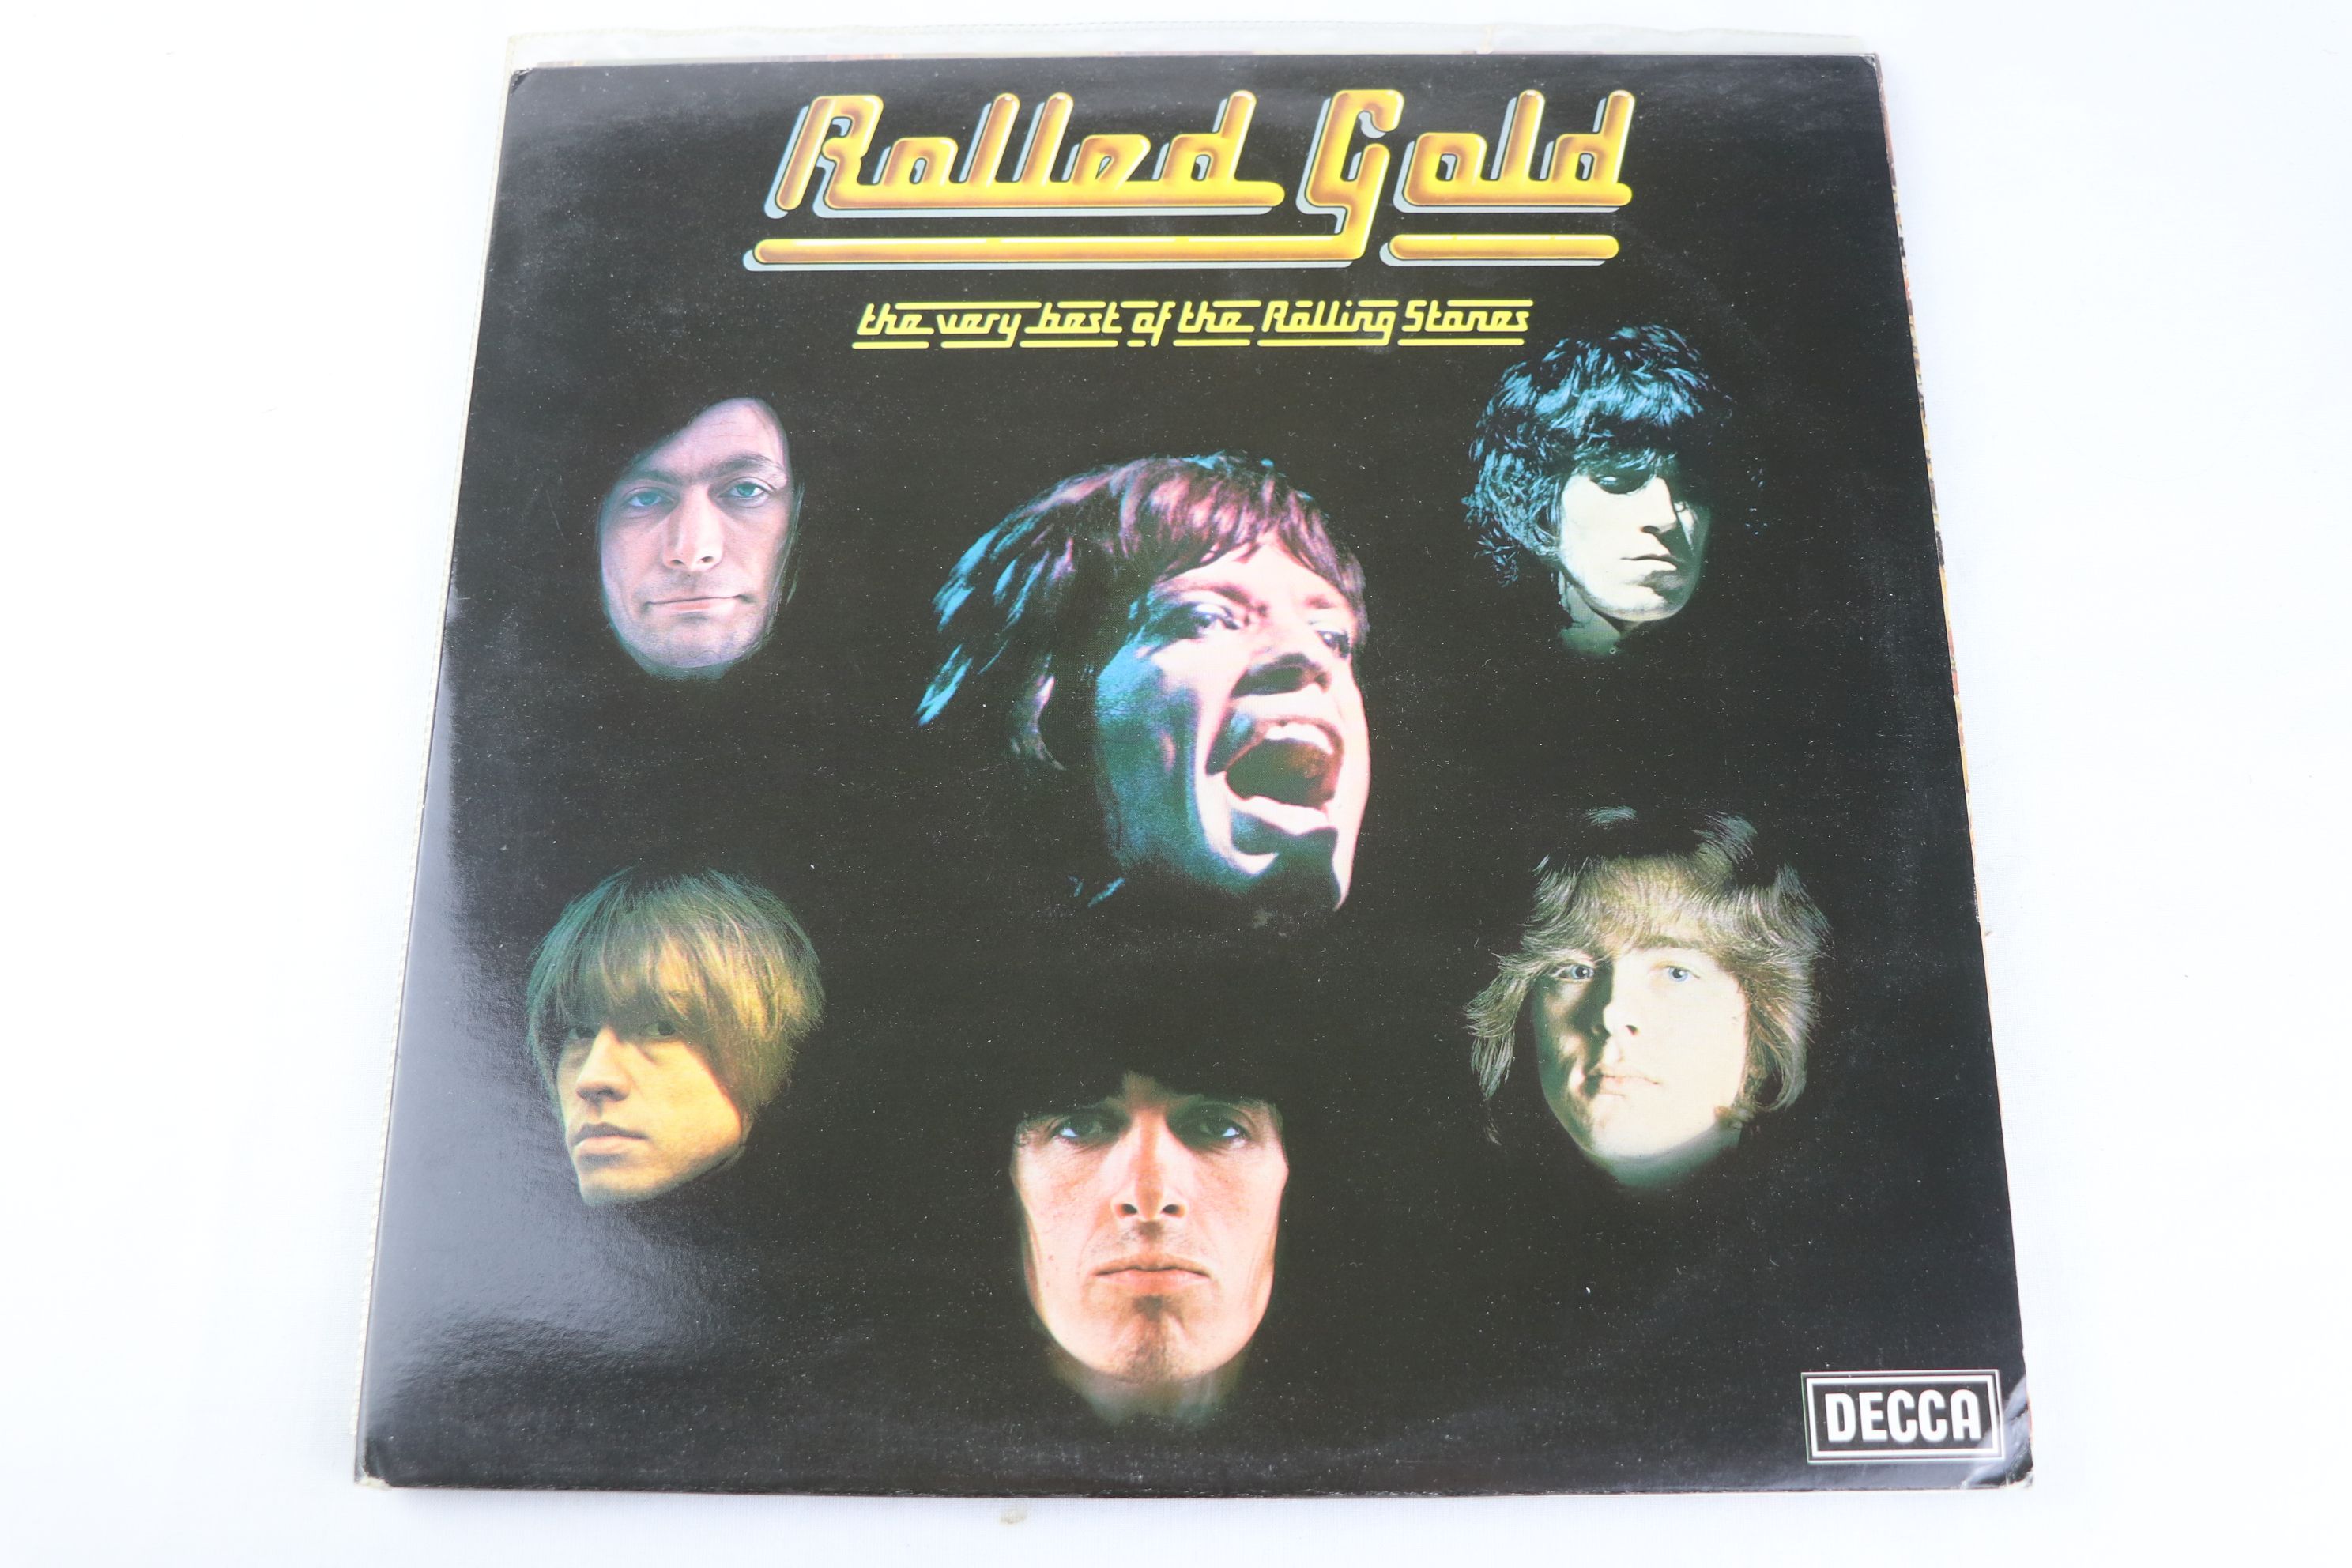 Vinyl - Five The Rolling Stones LPs plus a pink coloured Miss You 12", LPs include Rolled Gold, - Image 6 of 7